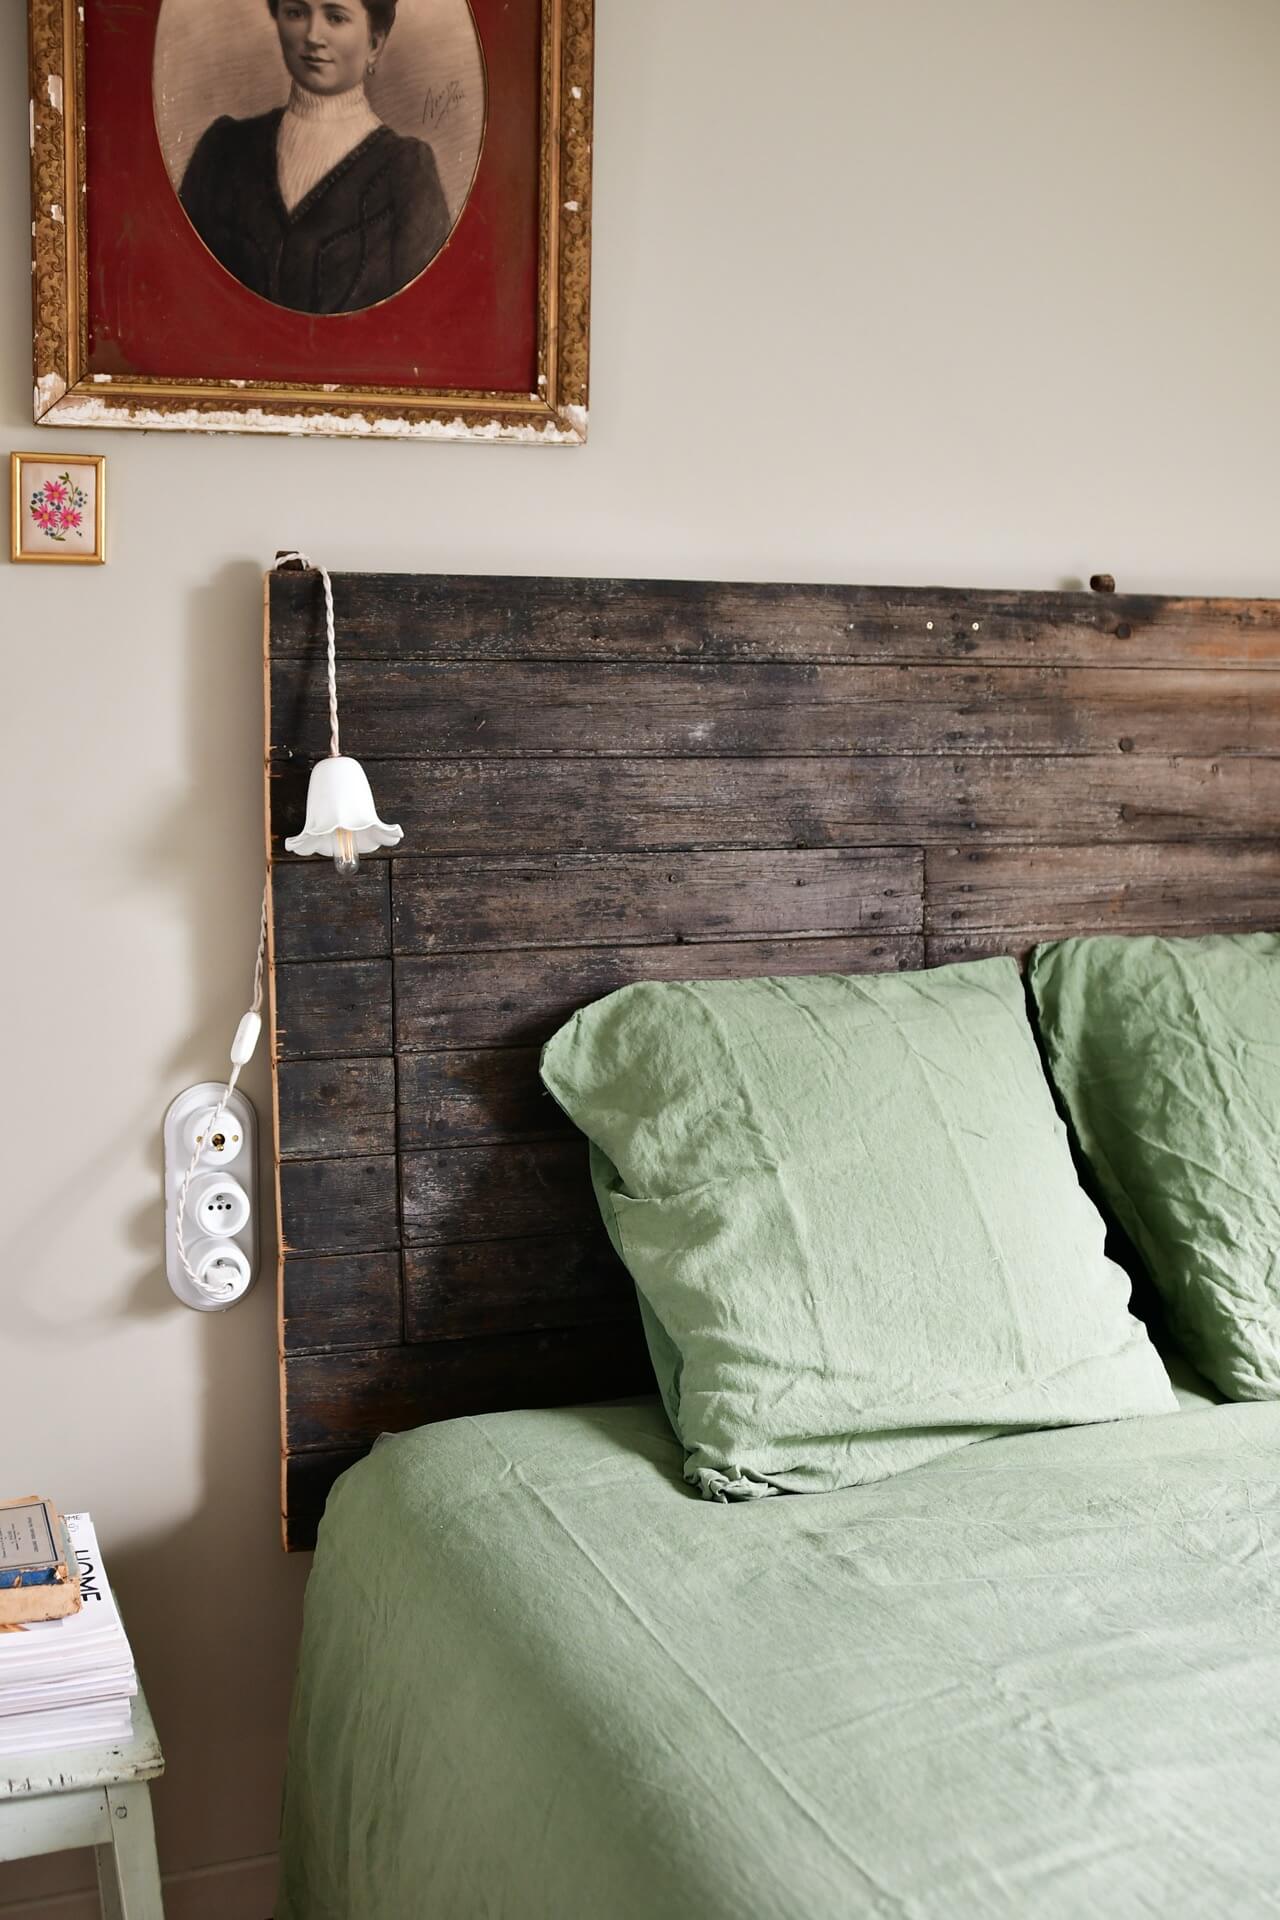 Bed headboard made from reclaimed wood and vintage details decorating the space